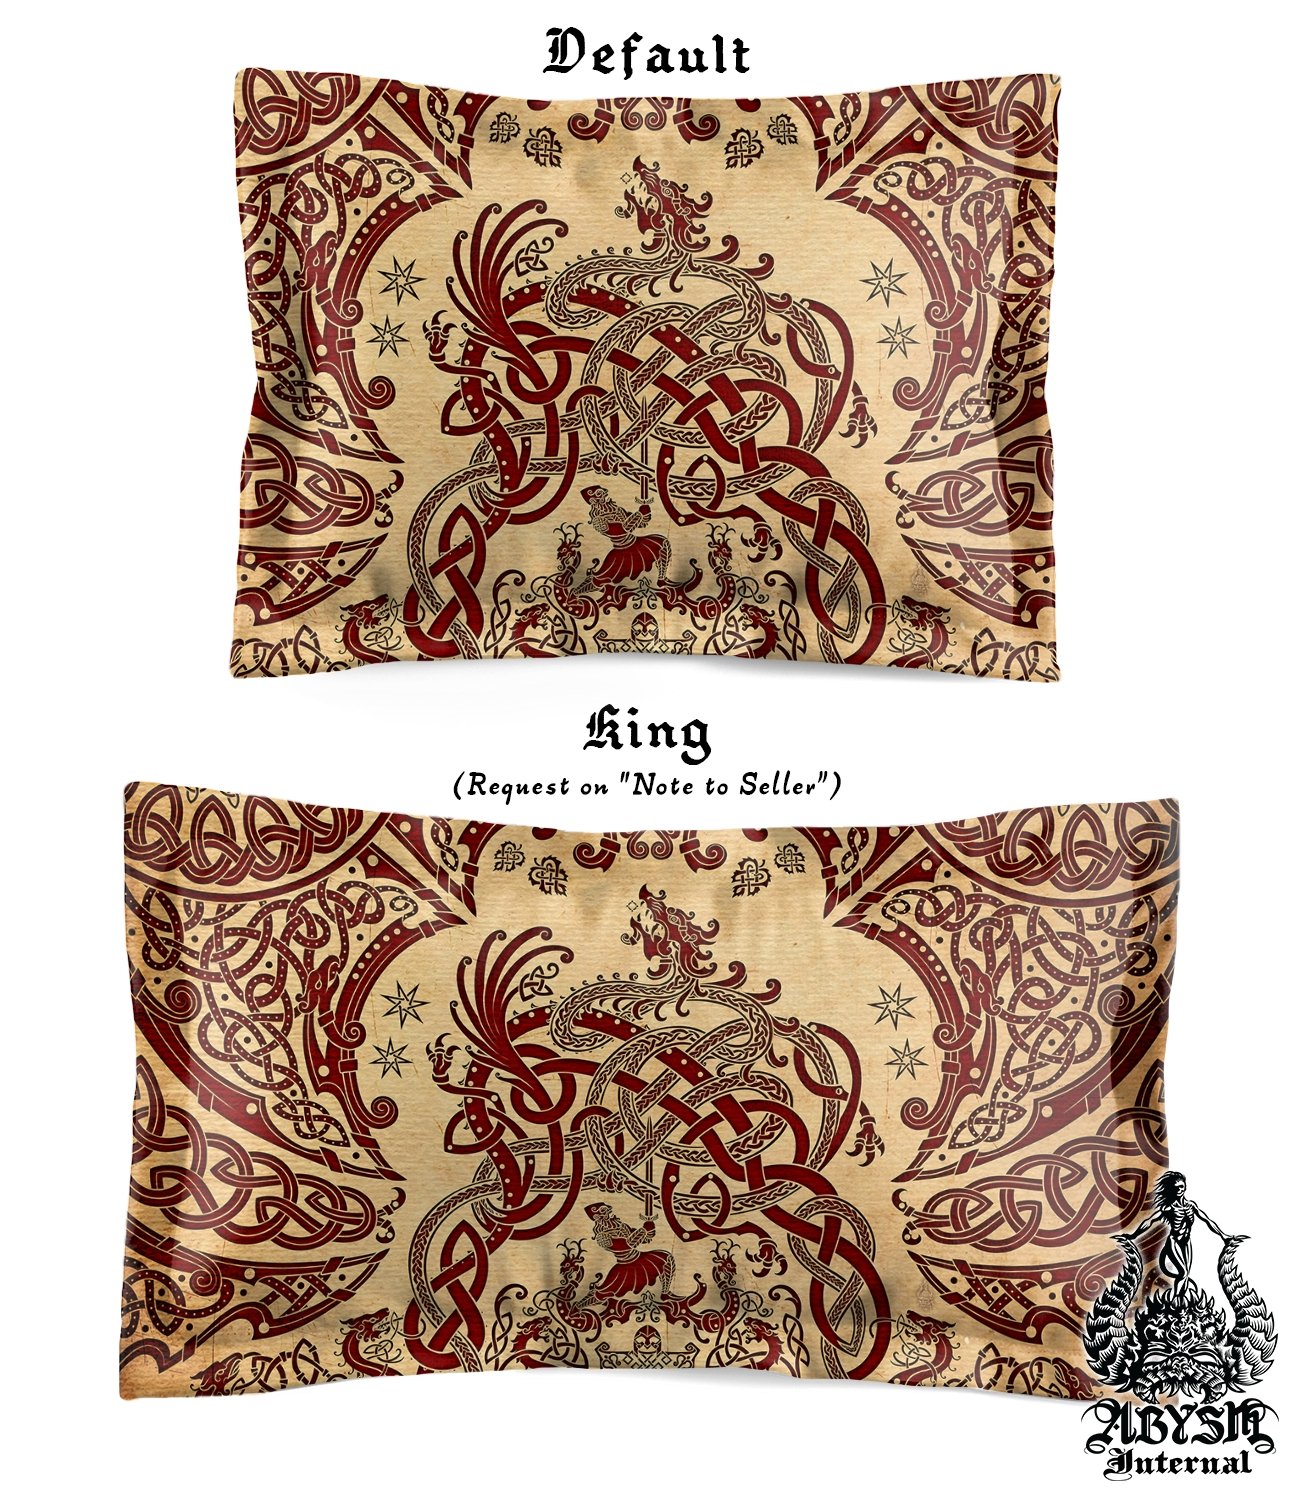 Viking Bedding Set, Comforter and Duvet, Norse Bed Cover and Bedroom Decor, Nordic Art, Sigurd kills Dragon Fafnir, King, Queen and Twin Size - Paper - Abysm Internal